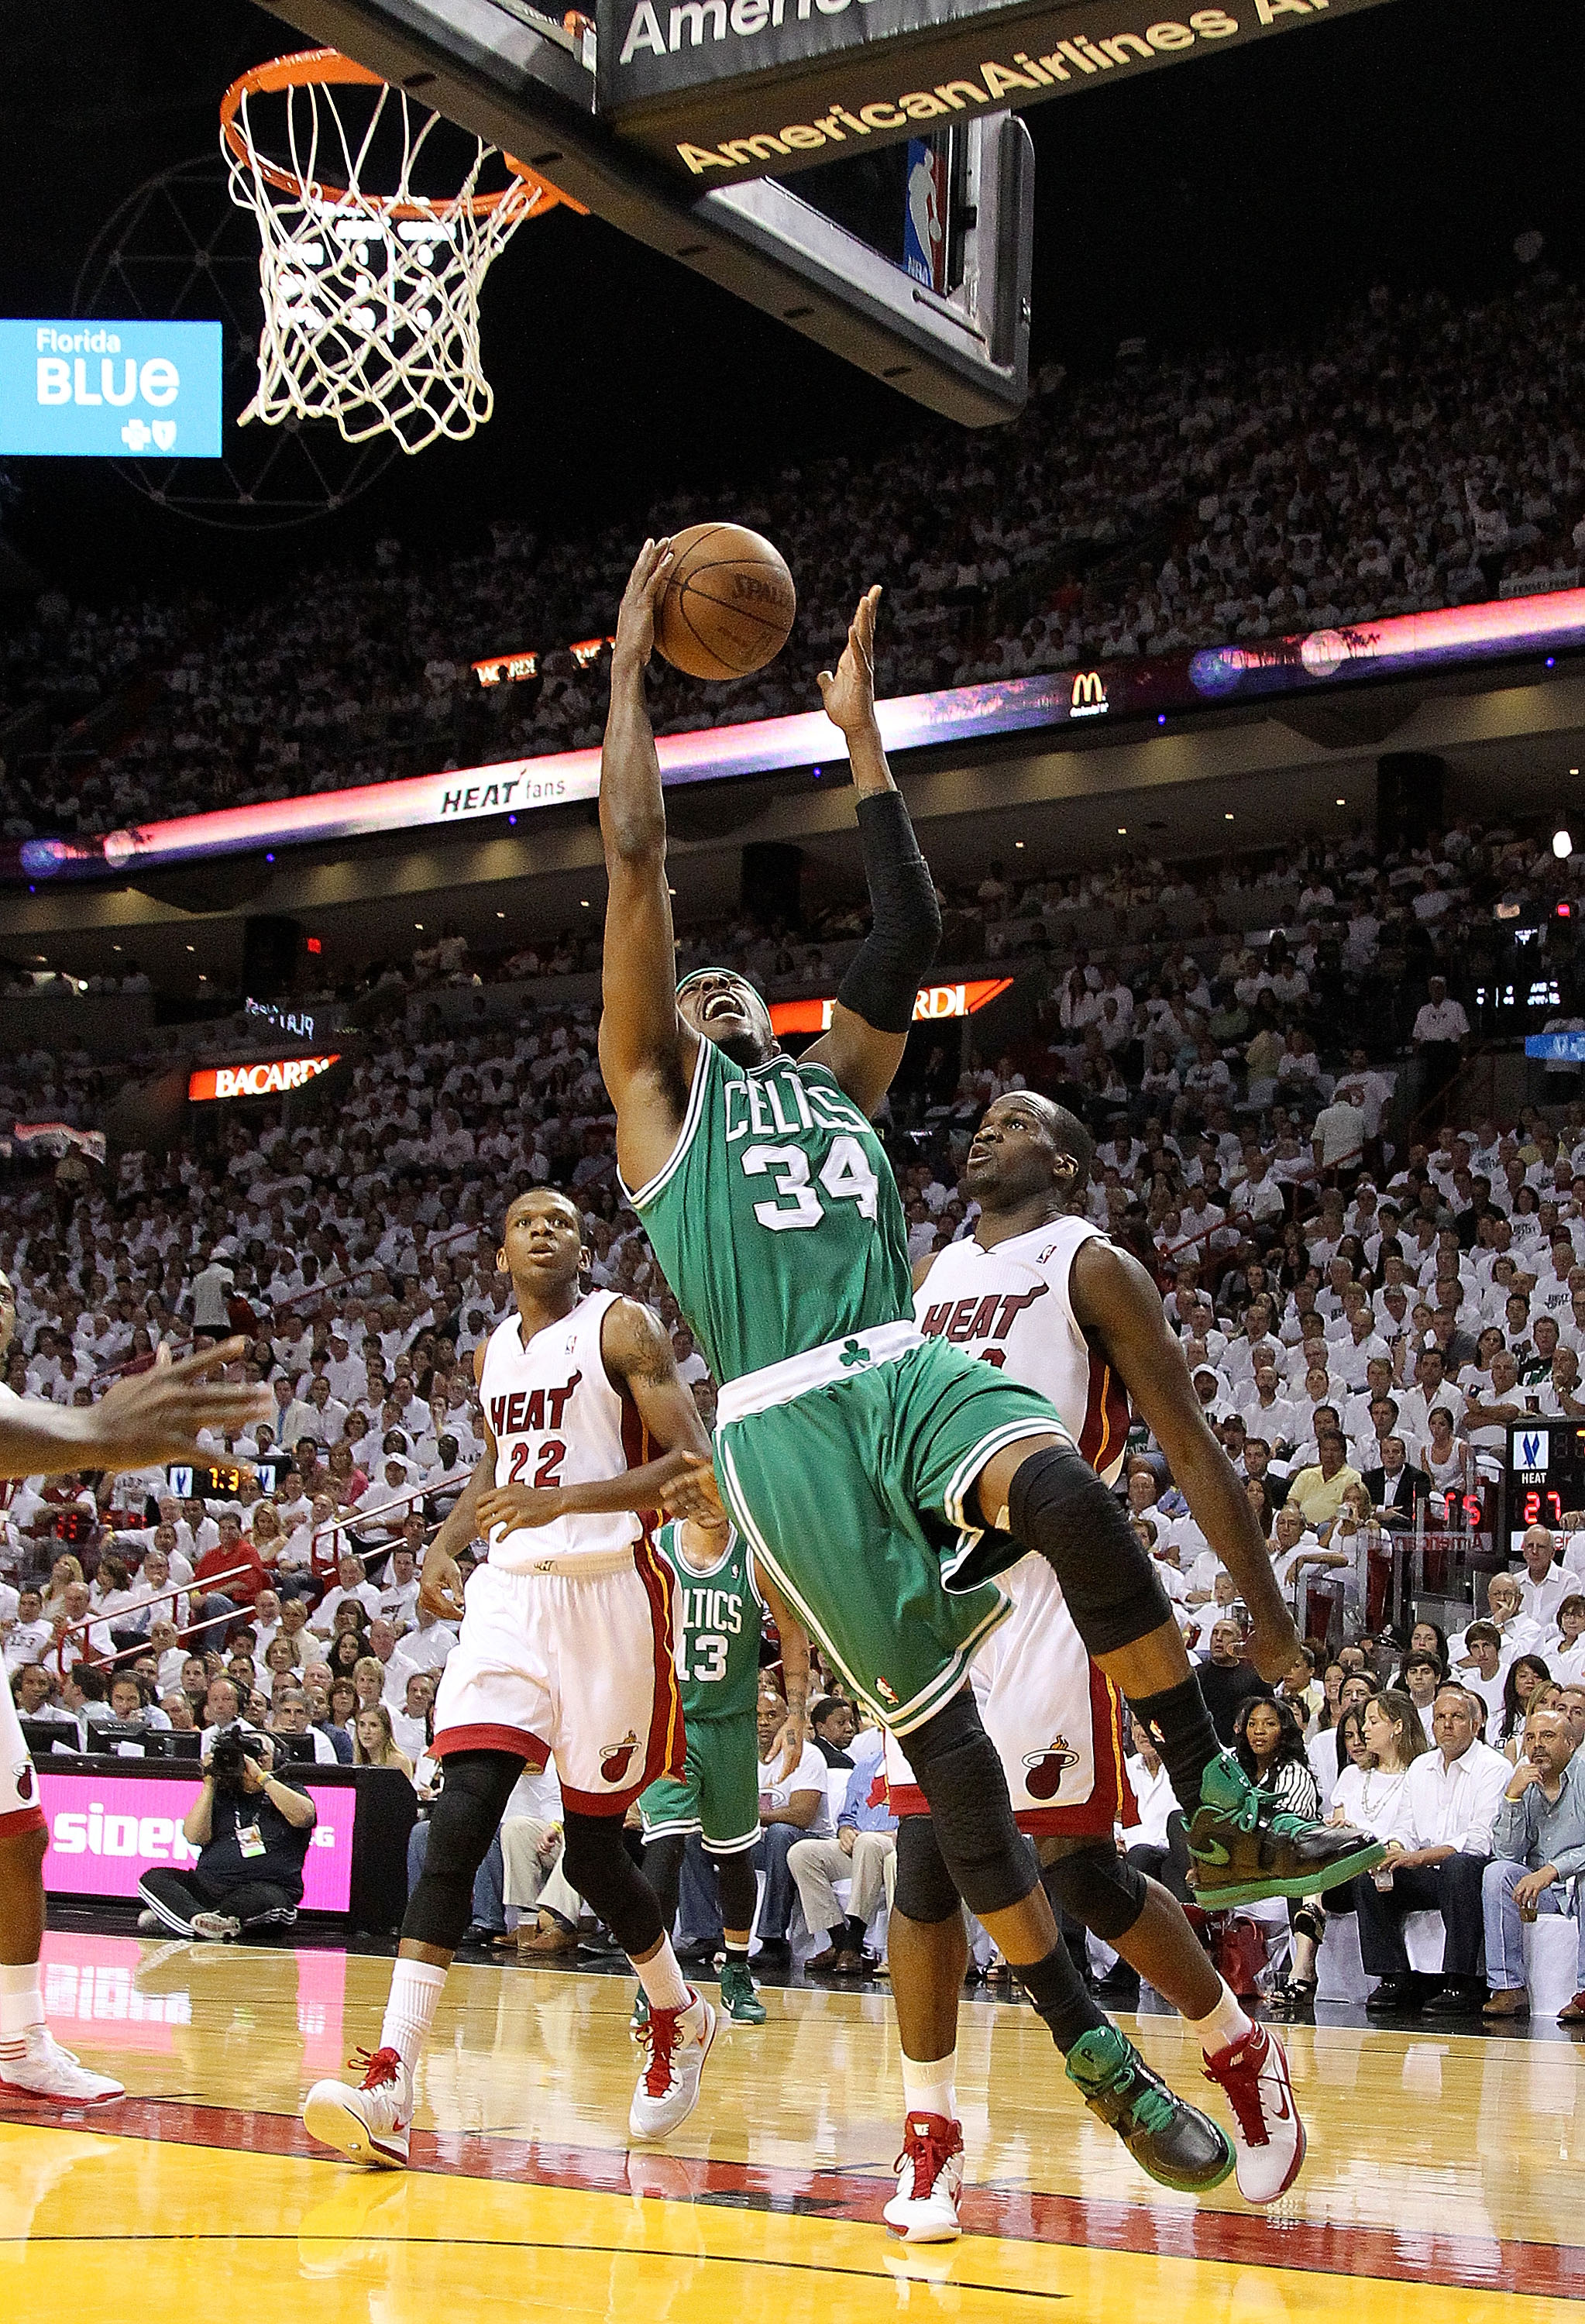 MIAMI, FL - MAY 11:  Paul Pierce #34 of the Boston Celtics drives against Joel Anthony #50 of the Miami Heat during Game Five of the Eastern Conference Semifinals of the 2011 NBA Playoffs at American Airlines Arena on May 11, 2011 in Miami, Florida. NOTE